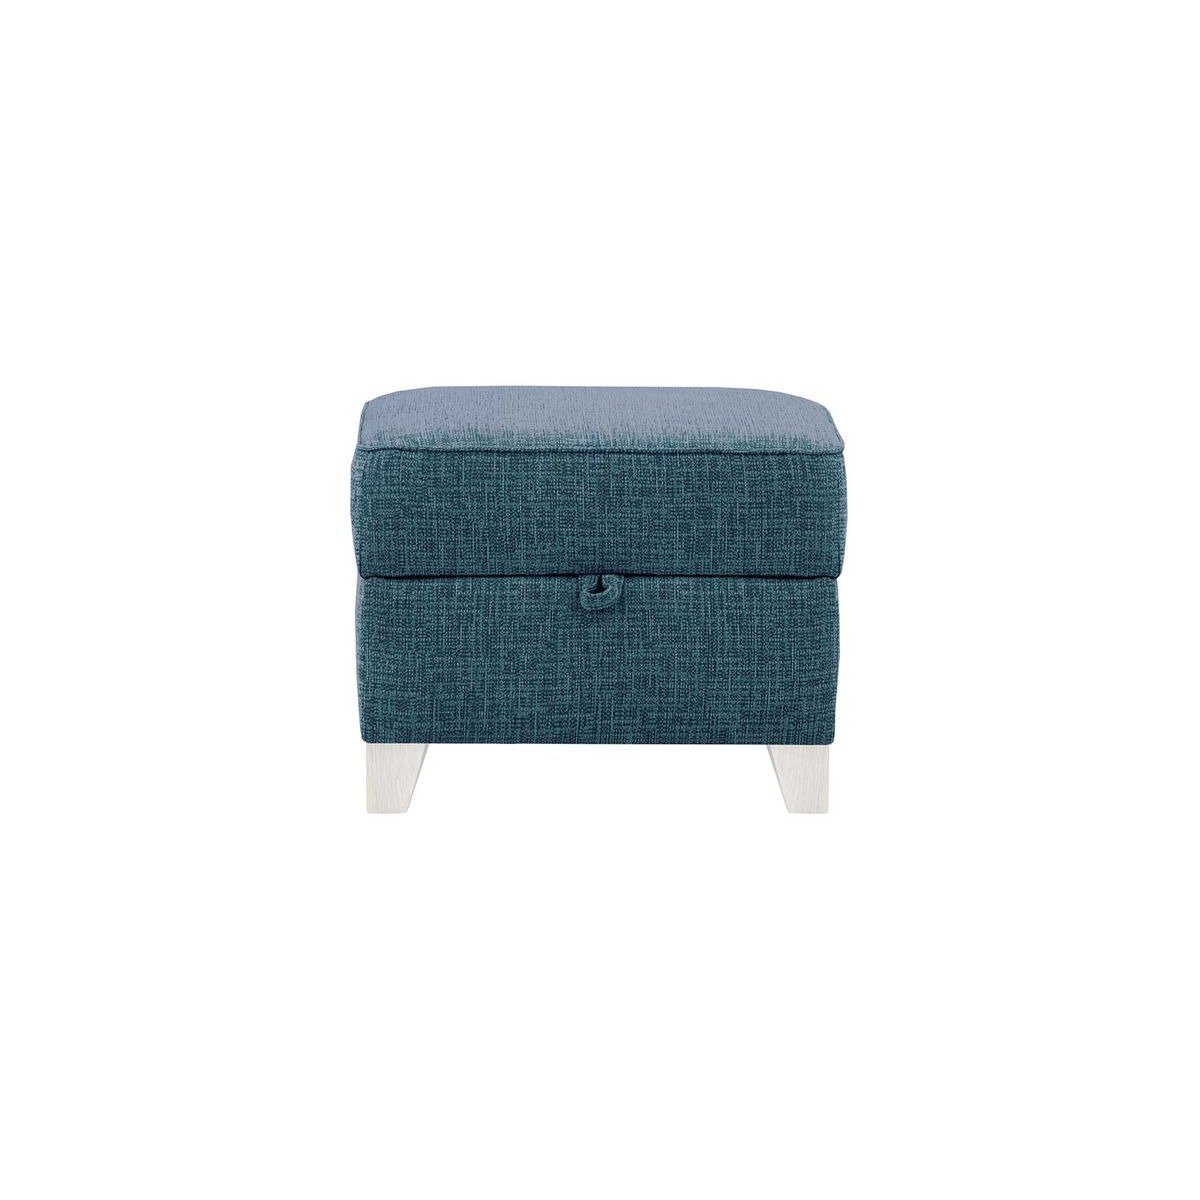 James Footstool with Storage, teal, Leg colour: white - image 1